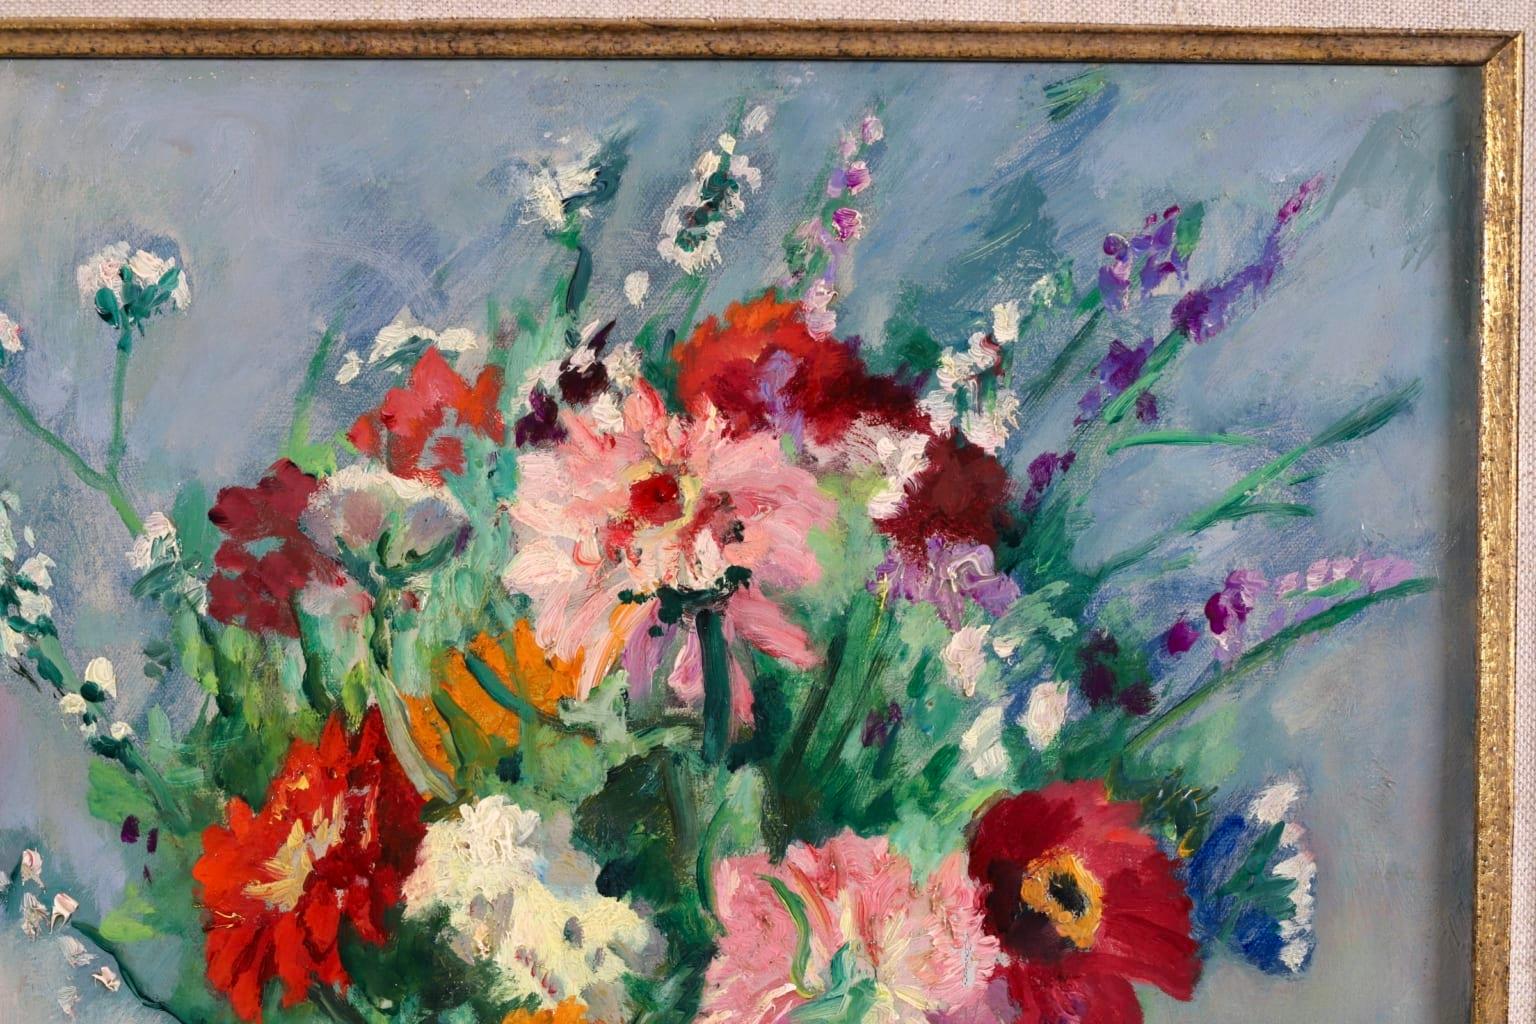 A stunning oil on canvas by French fauvist painter Henri Charles Manguin. The work is a still life of a glass vase of colourful flowers - including zinnias and ranunculus - in red, orange, pink, purple and white. The vase is placed on a table with a